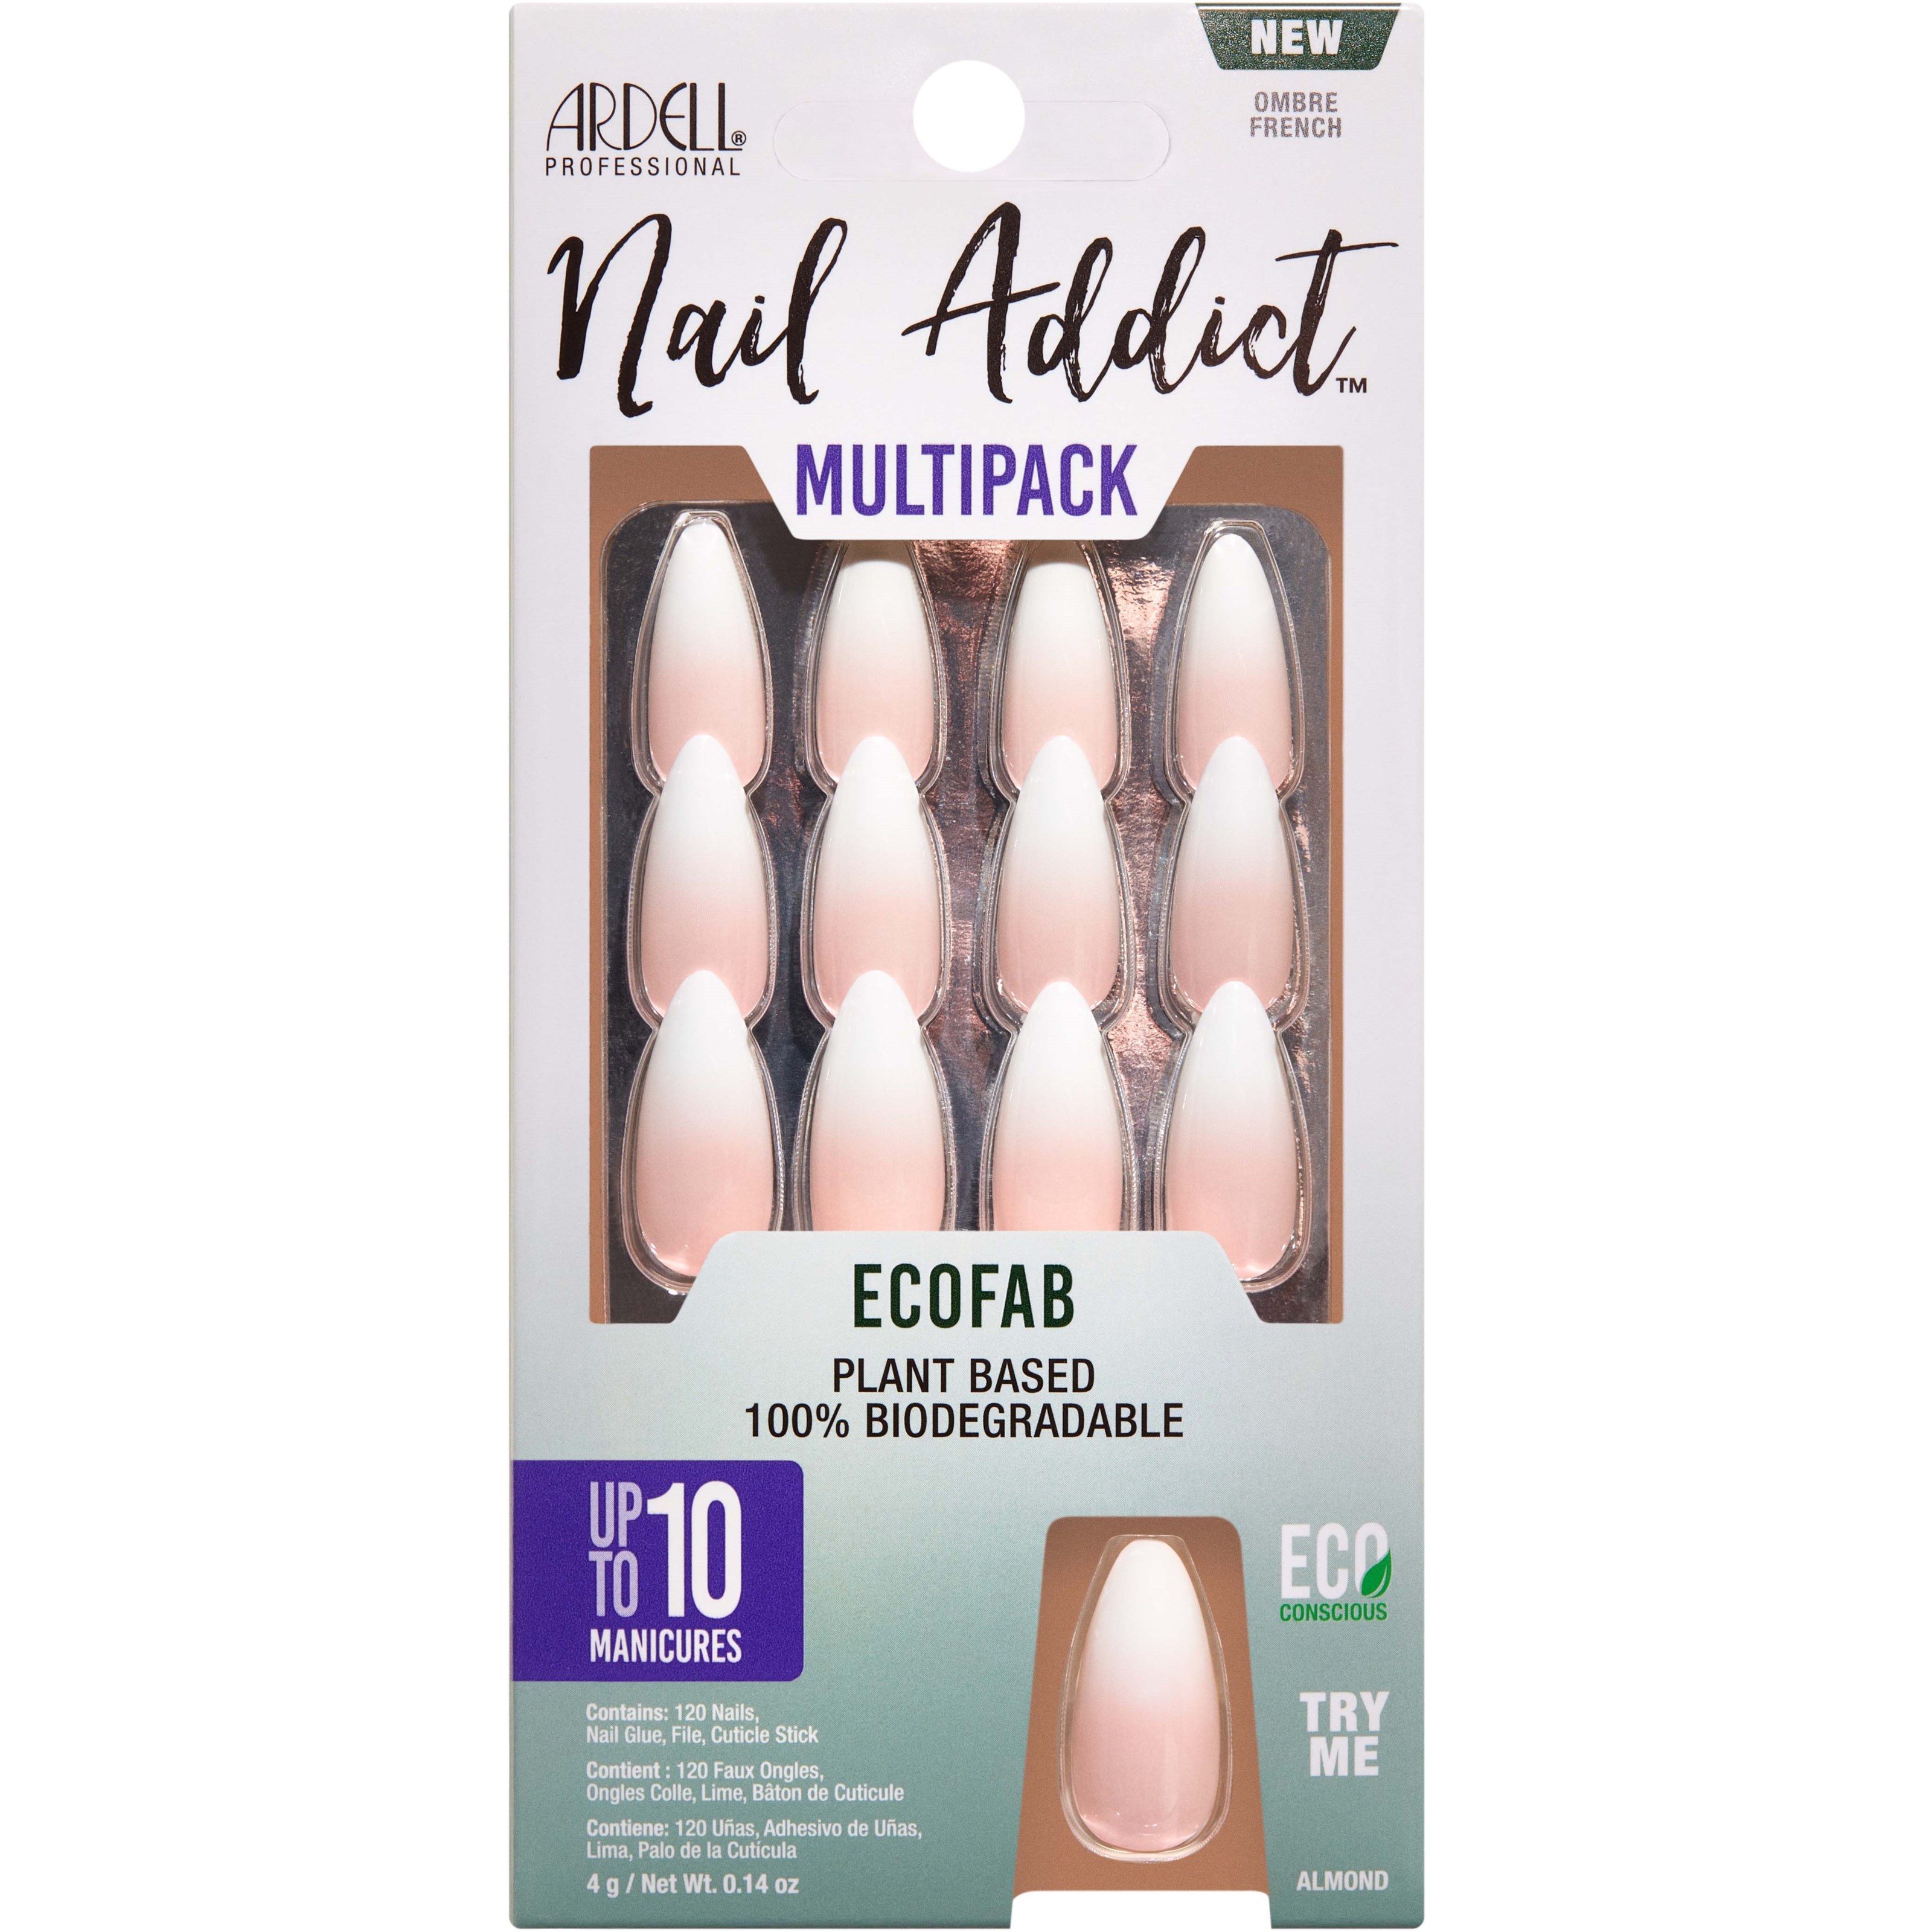 Läs mer om Ardell Nail Addict EcoFab Multipack Ombre French